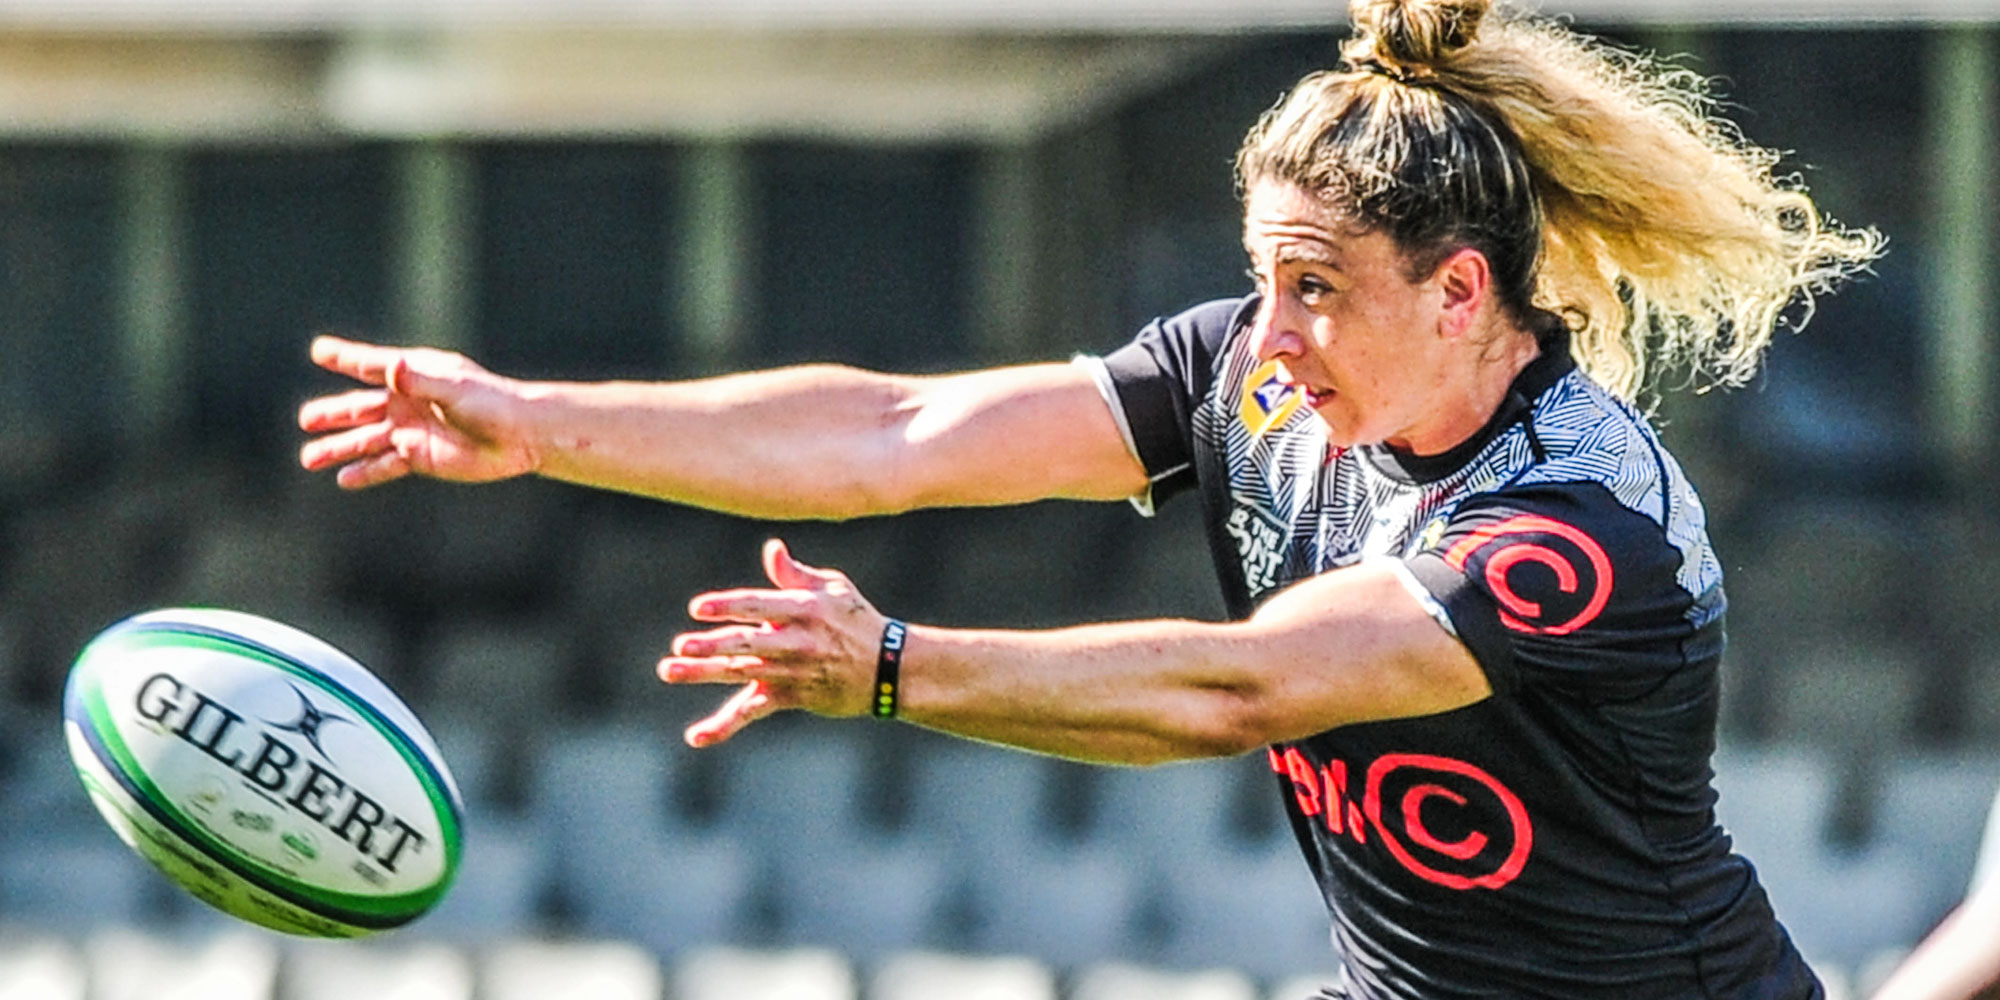 Megan Comley will start at fullback for the Cell C Sharks Women this weekend.